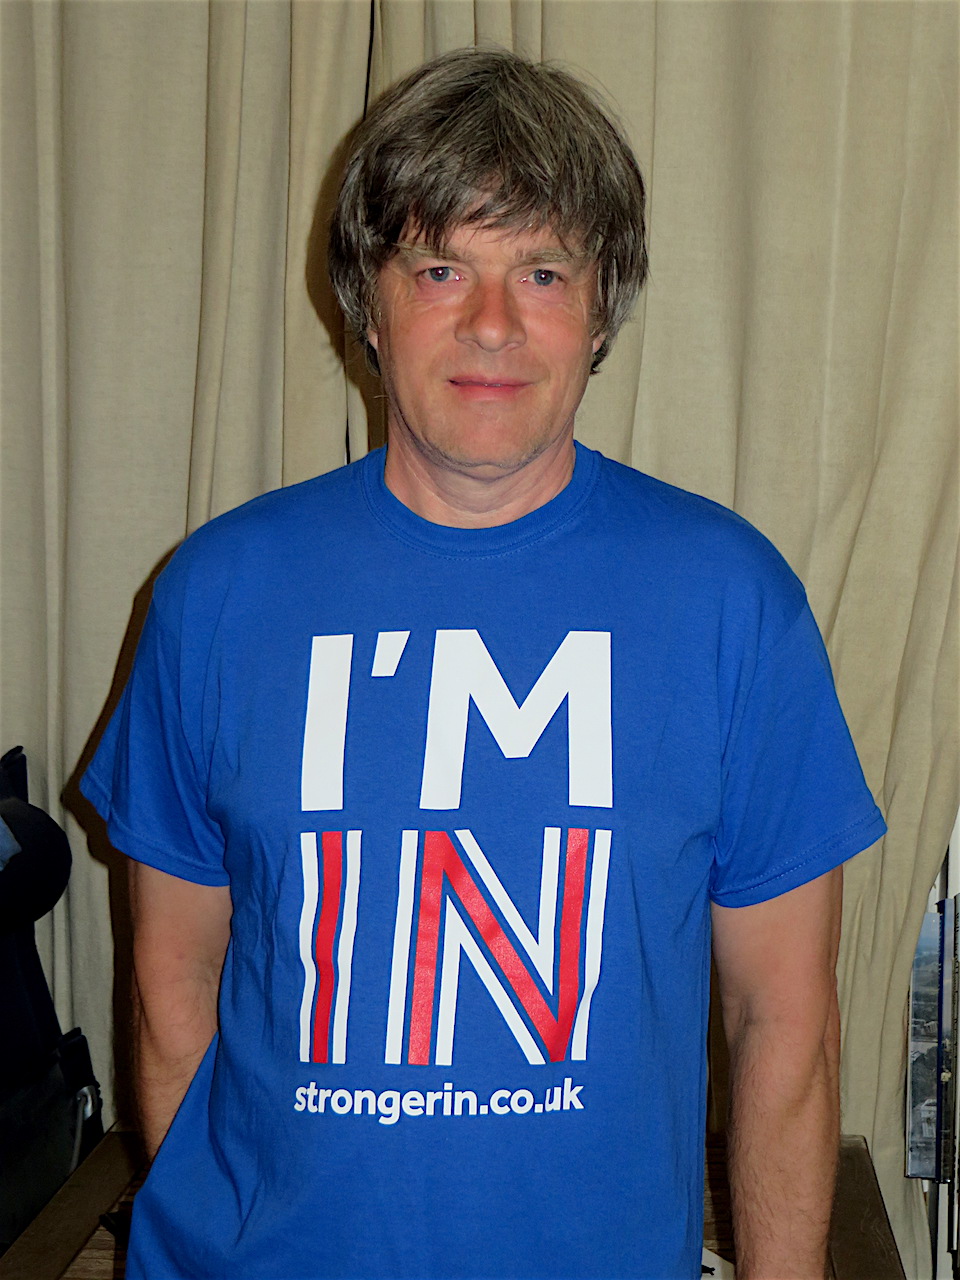 Andy Worthington showing his support for the campaign for Britain to remain in the EU.